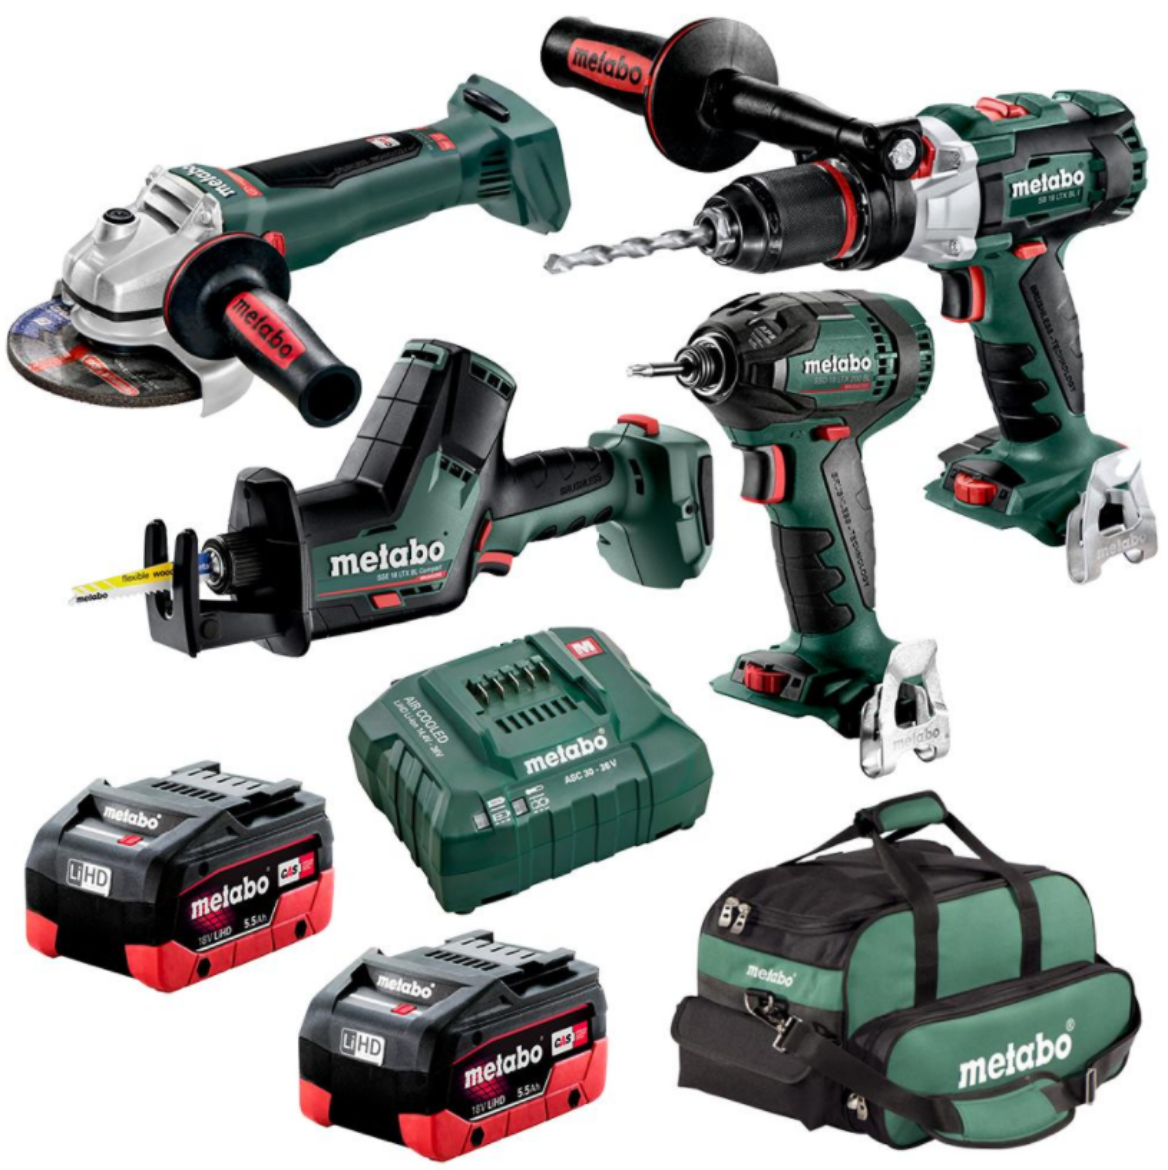 Picture of METABO 4 PIECE SET BRUSHLESS HAMMER+ IMPACT DRIVER+ ANGLE GRINDER+ COMPACT SABRE SAW + 2 X 5.5AH BATTERIES + CHARGER + TOOLBAG - BL4SB2HD5.5AQ